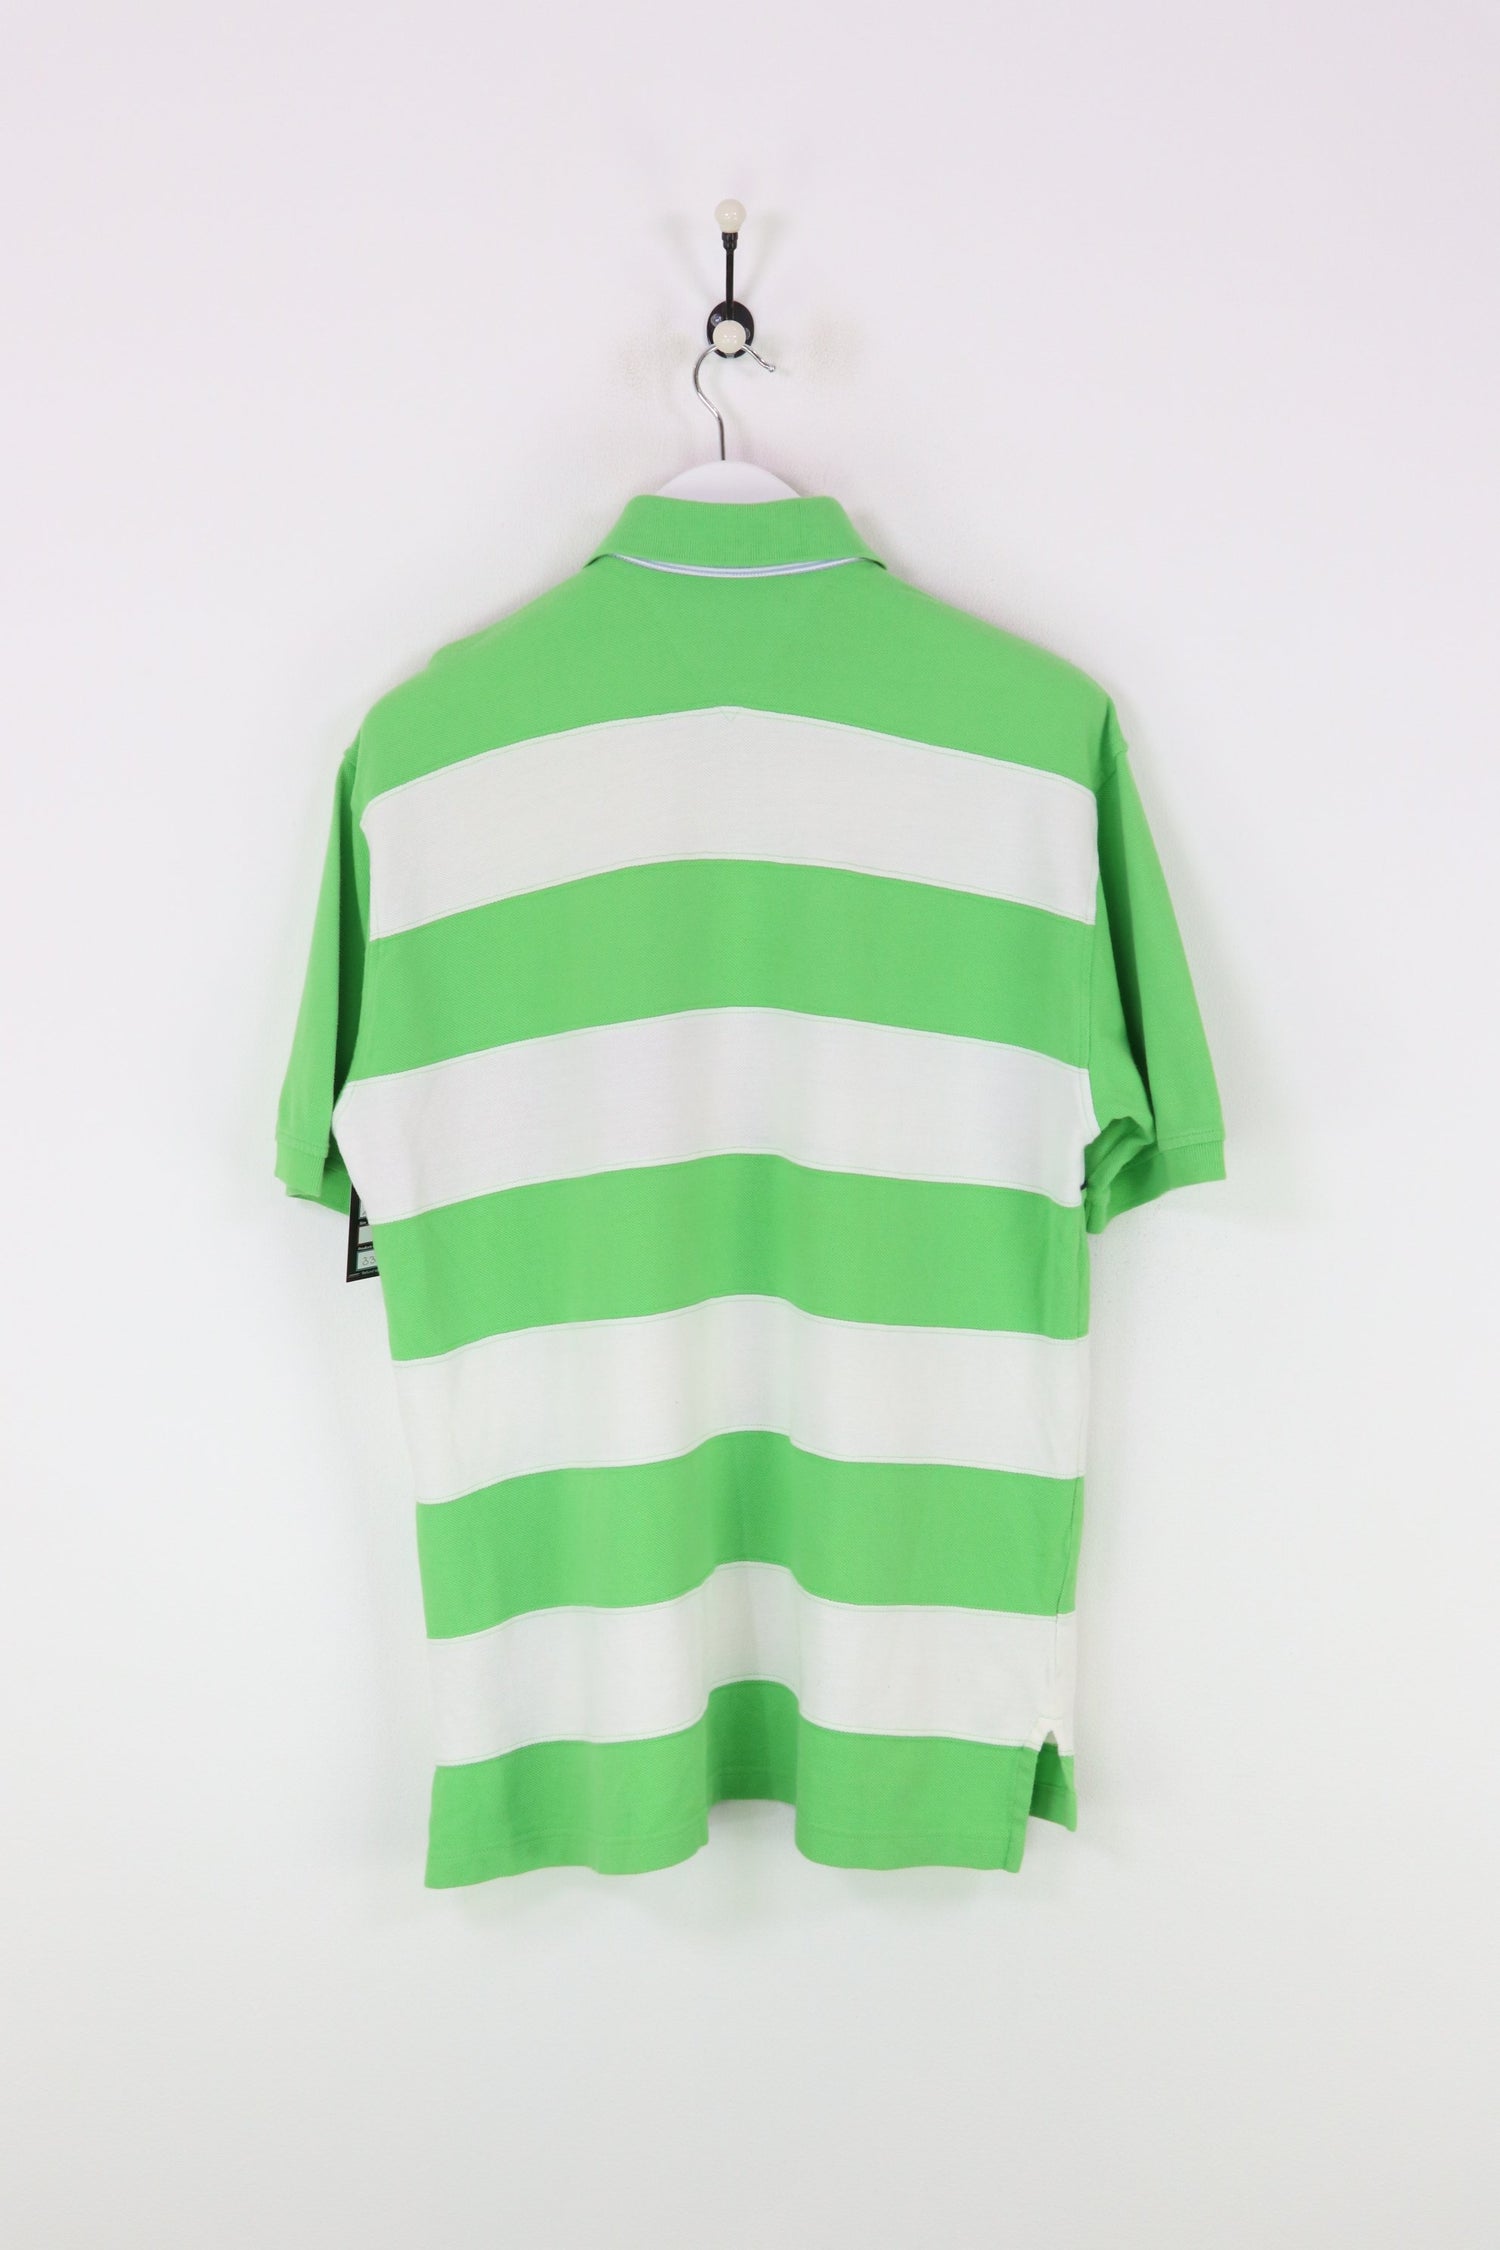 Tommy Hilfiger Polo Shirt Green/White Large